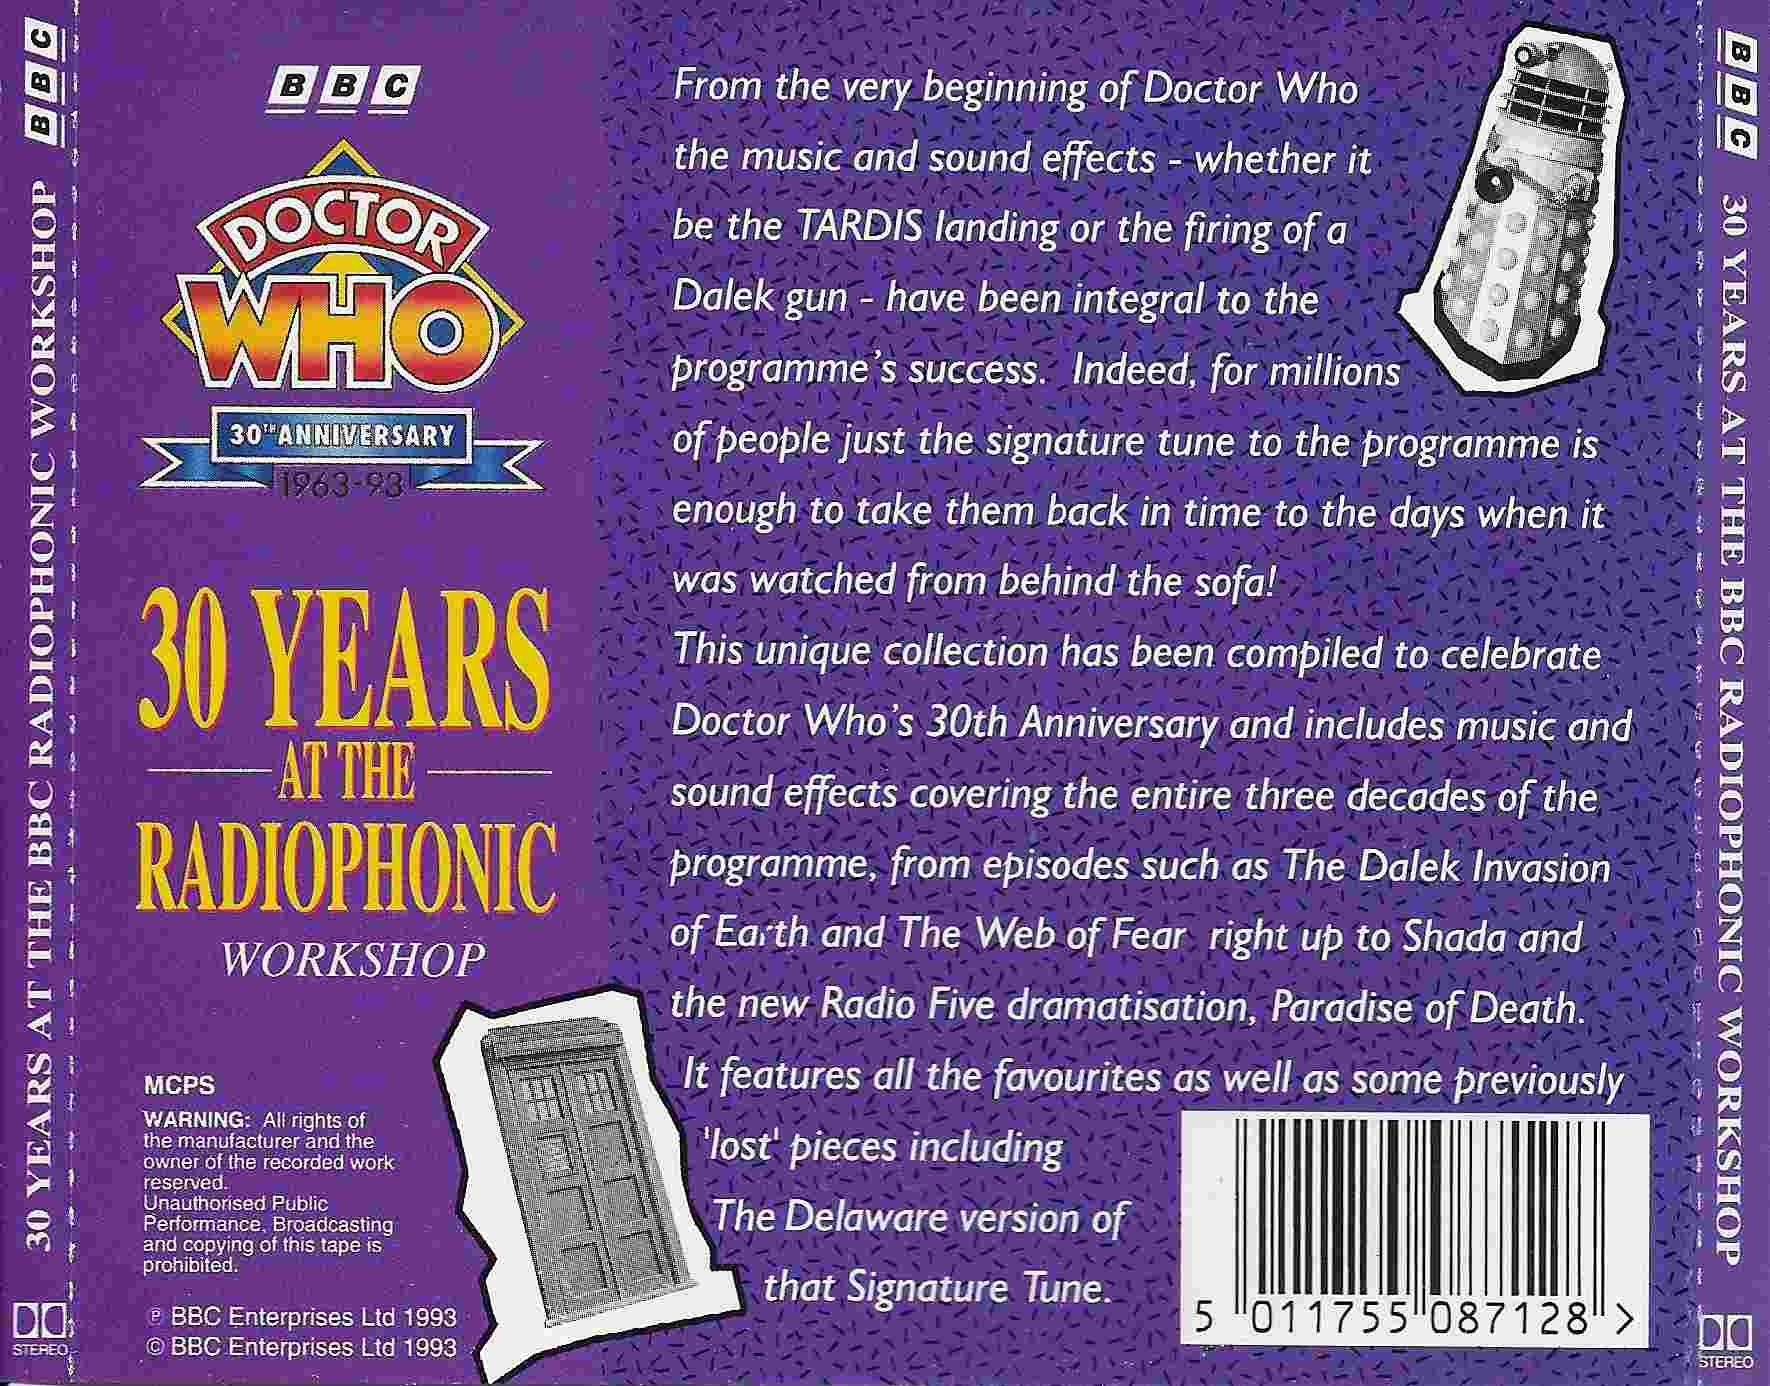 Picture of BBCCD871 Doctor Who - 30 years at the BBC radiophonic workshop by artist Various from the BBC records and Tapes library